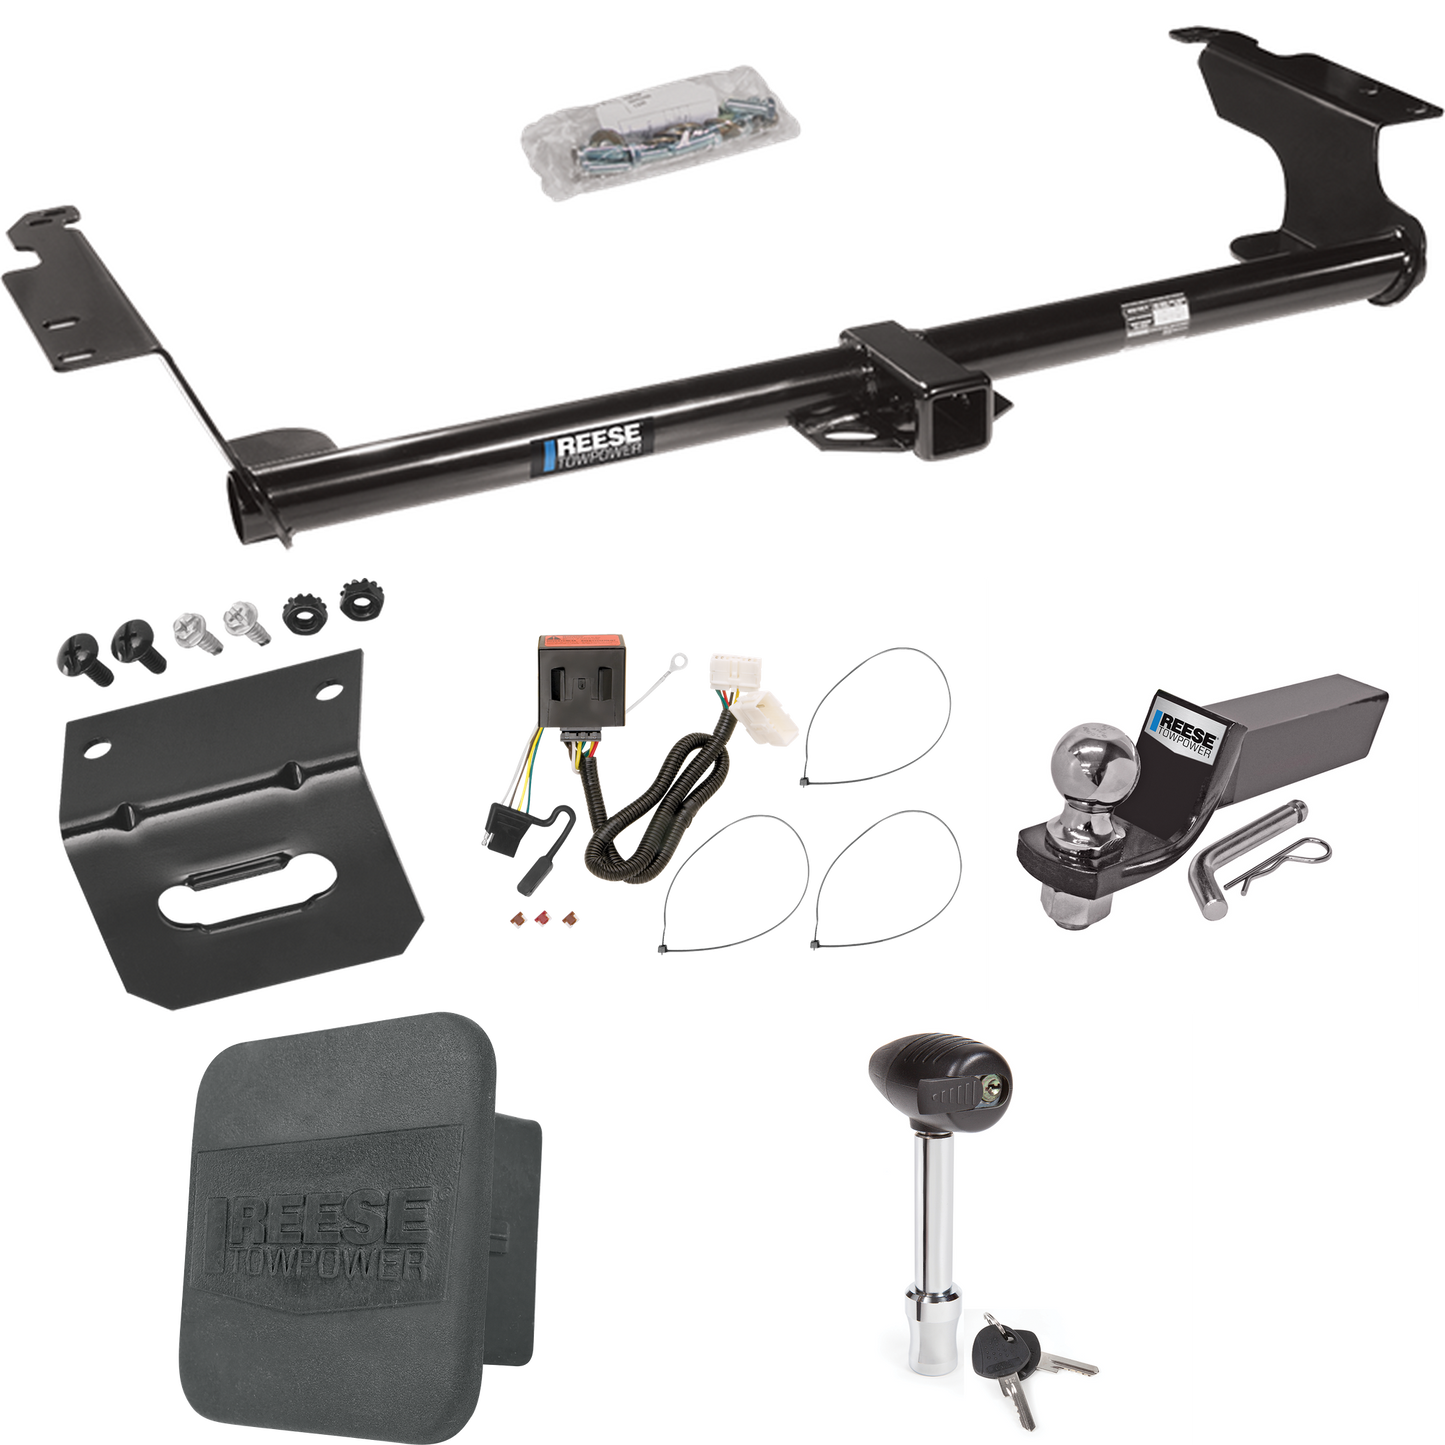 Fits 2011-2017 Honda Odyssey Trailer Hitch Tow PKG w/ 4-Flat Wiring + Starter Kit Ball Mount w/ 2" Drop & 2" Ball + 1-7/8" Ball + Wiring Bracket + Hitch Lock + Hitch Cover By Reese Towpower